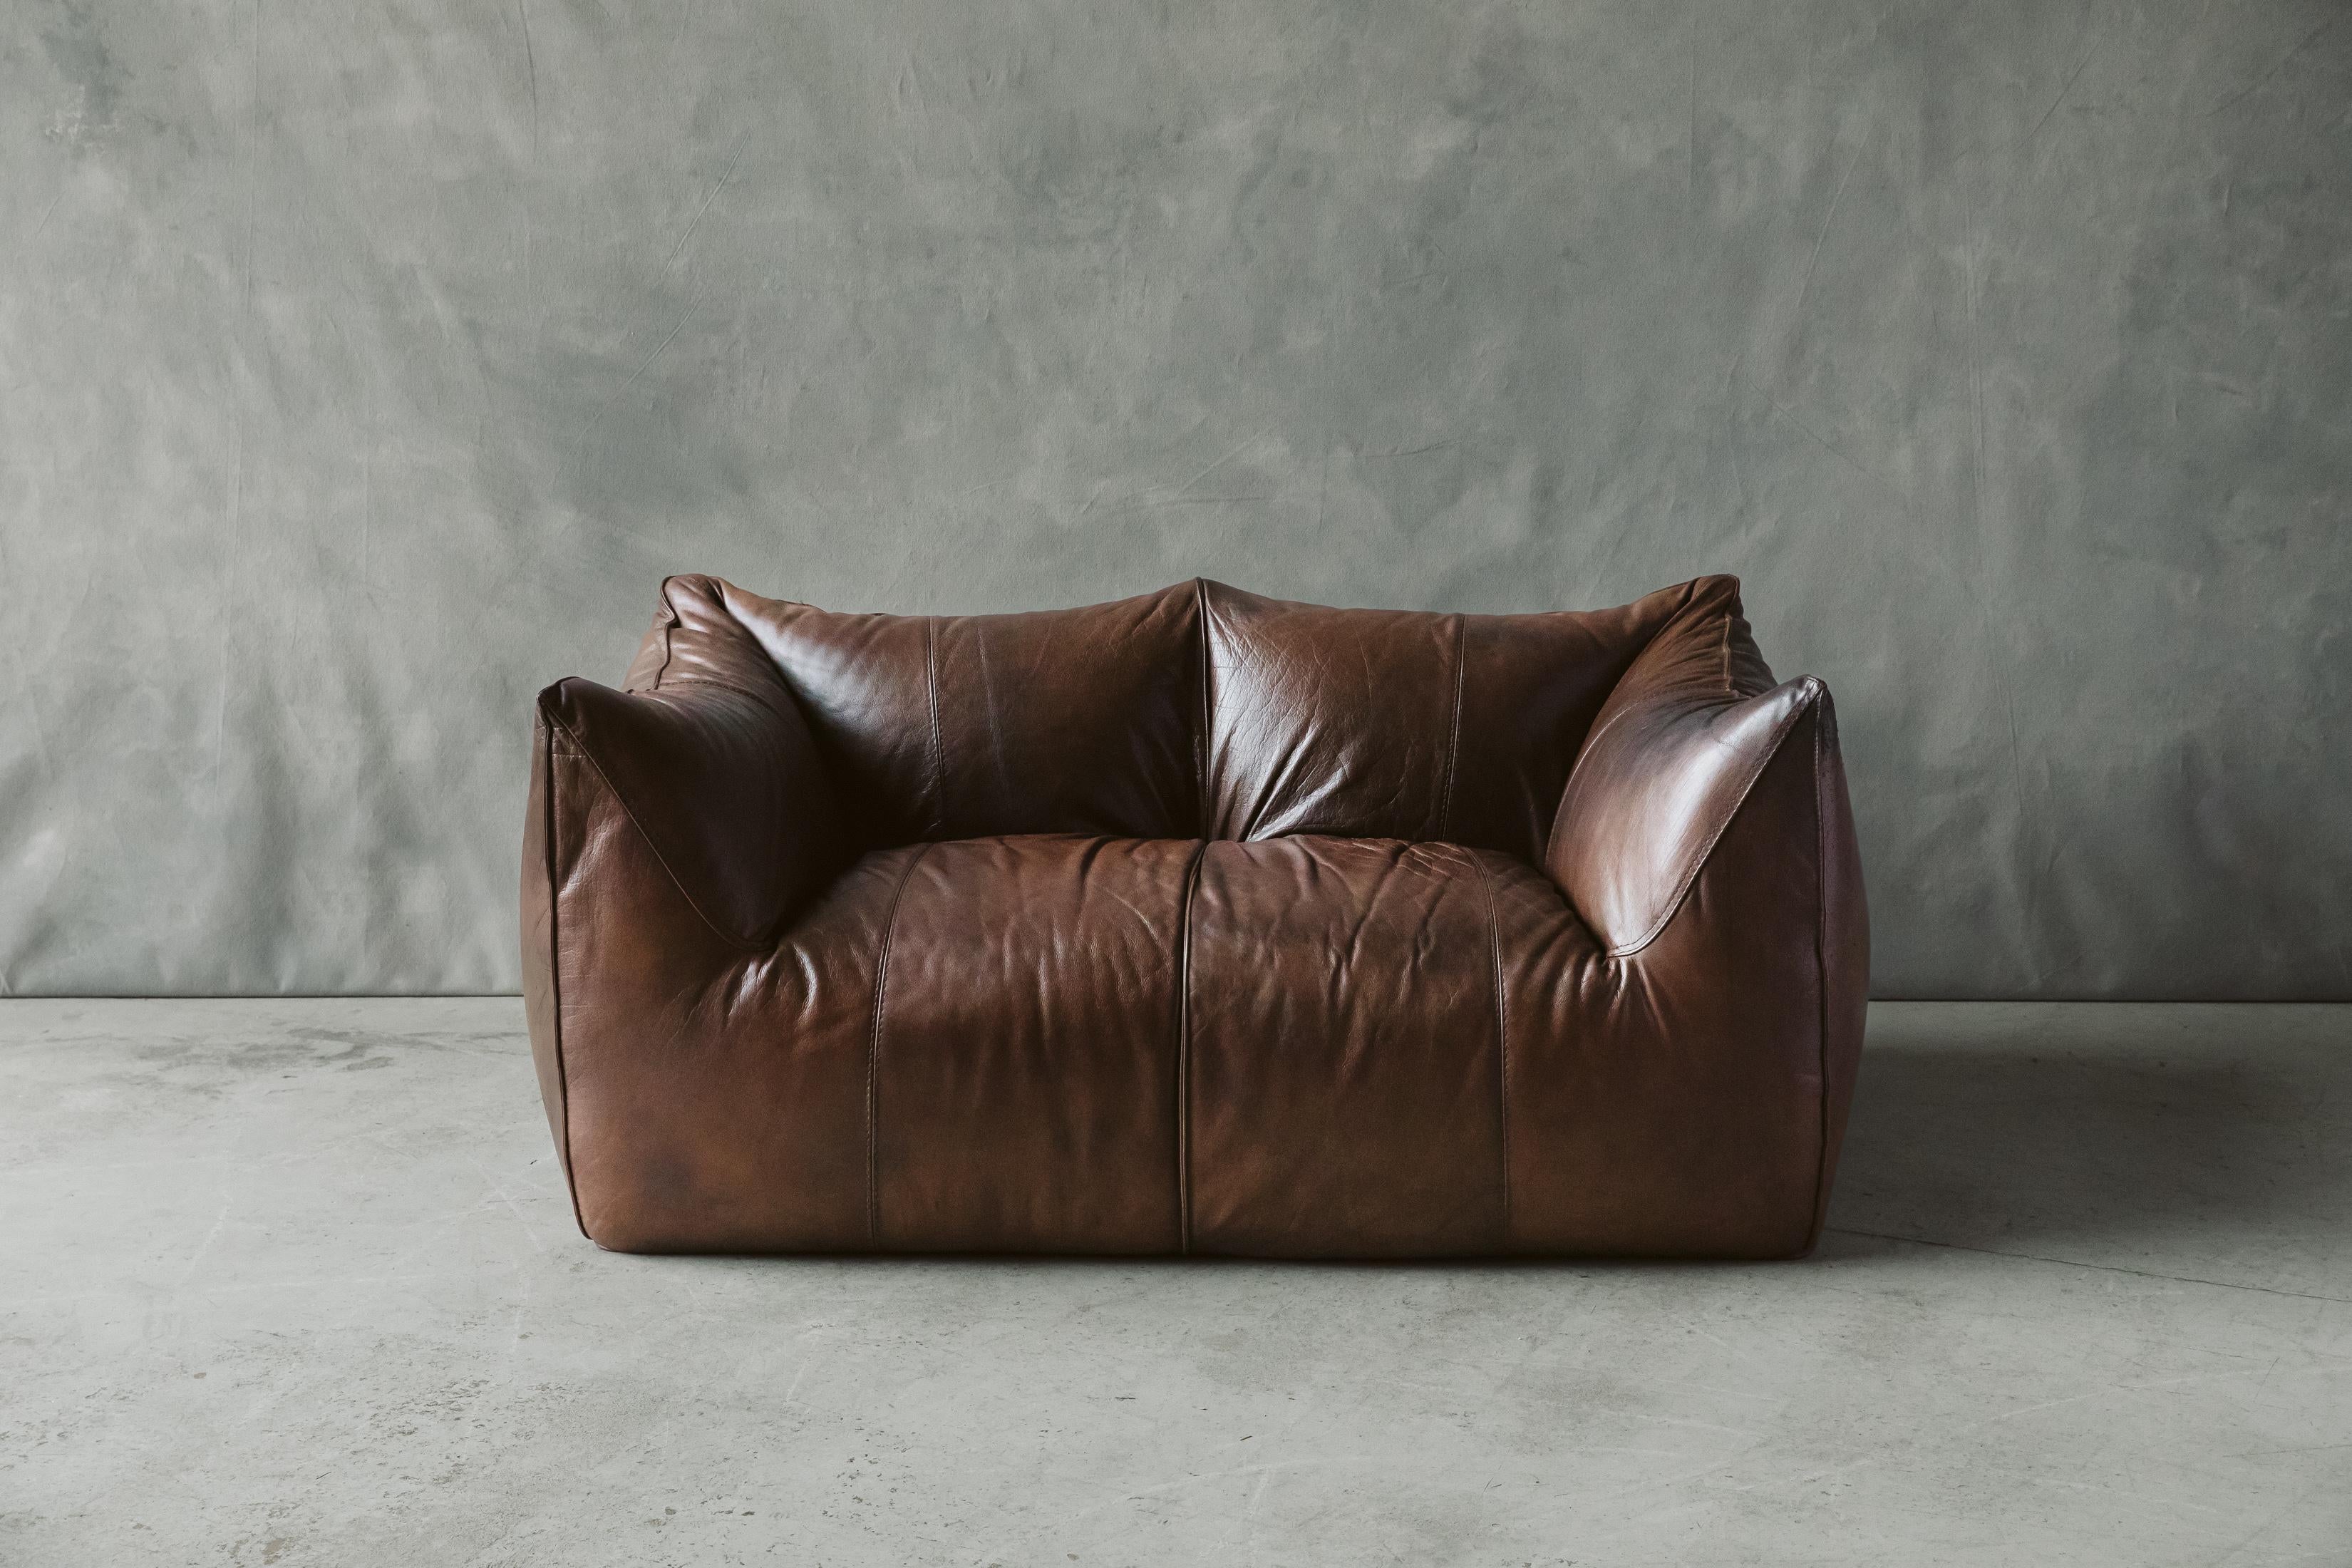 Vintage Le Bambole Leather Sofa Designed by Mario Bellini, B&B Italia, 1978.  Original brown leather upholstery with a fantastic patina and use.  

We don't have the time to write an extensive description on each of our pieces. We prefer to speak